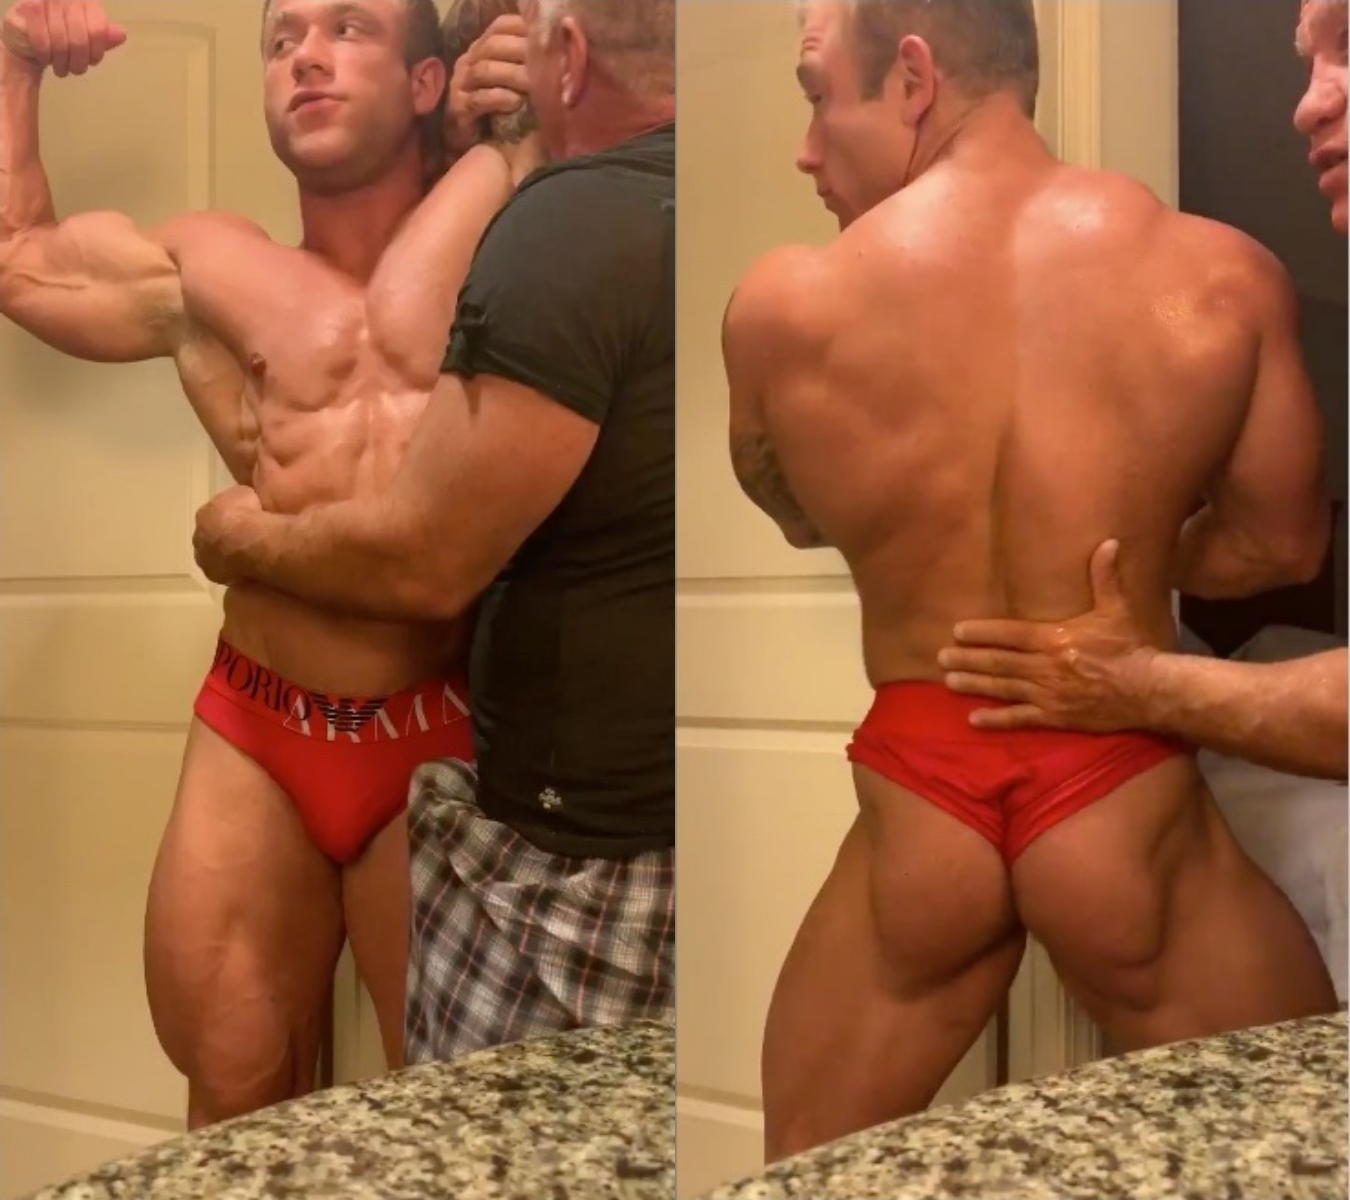 Old Man Muscle Porn - Old man worship bodybuilder muscles - ThisVid.com